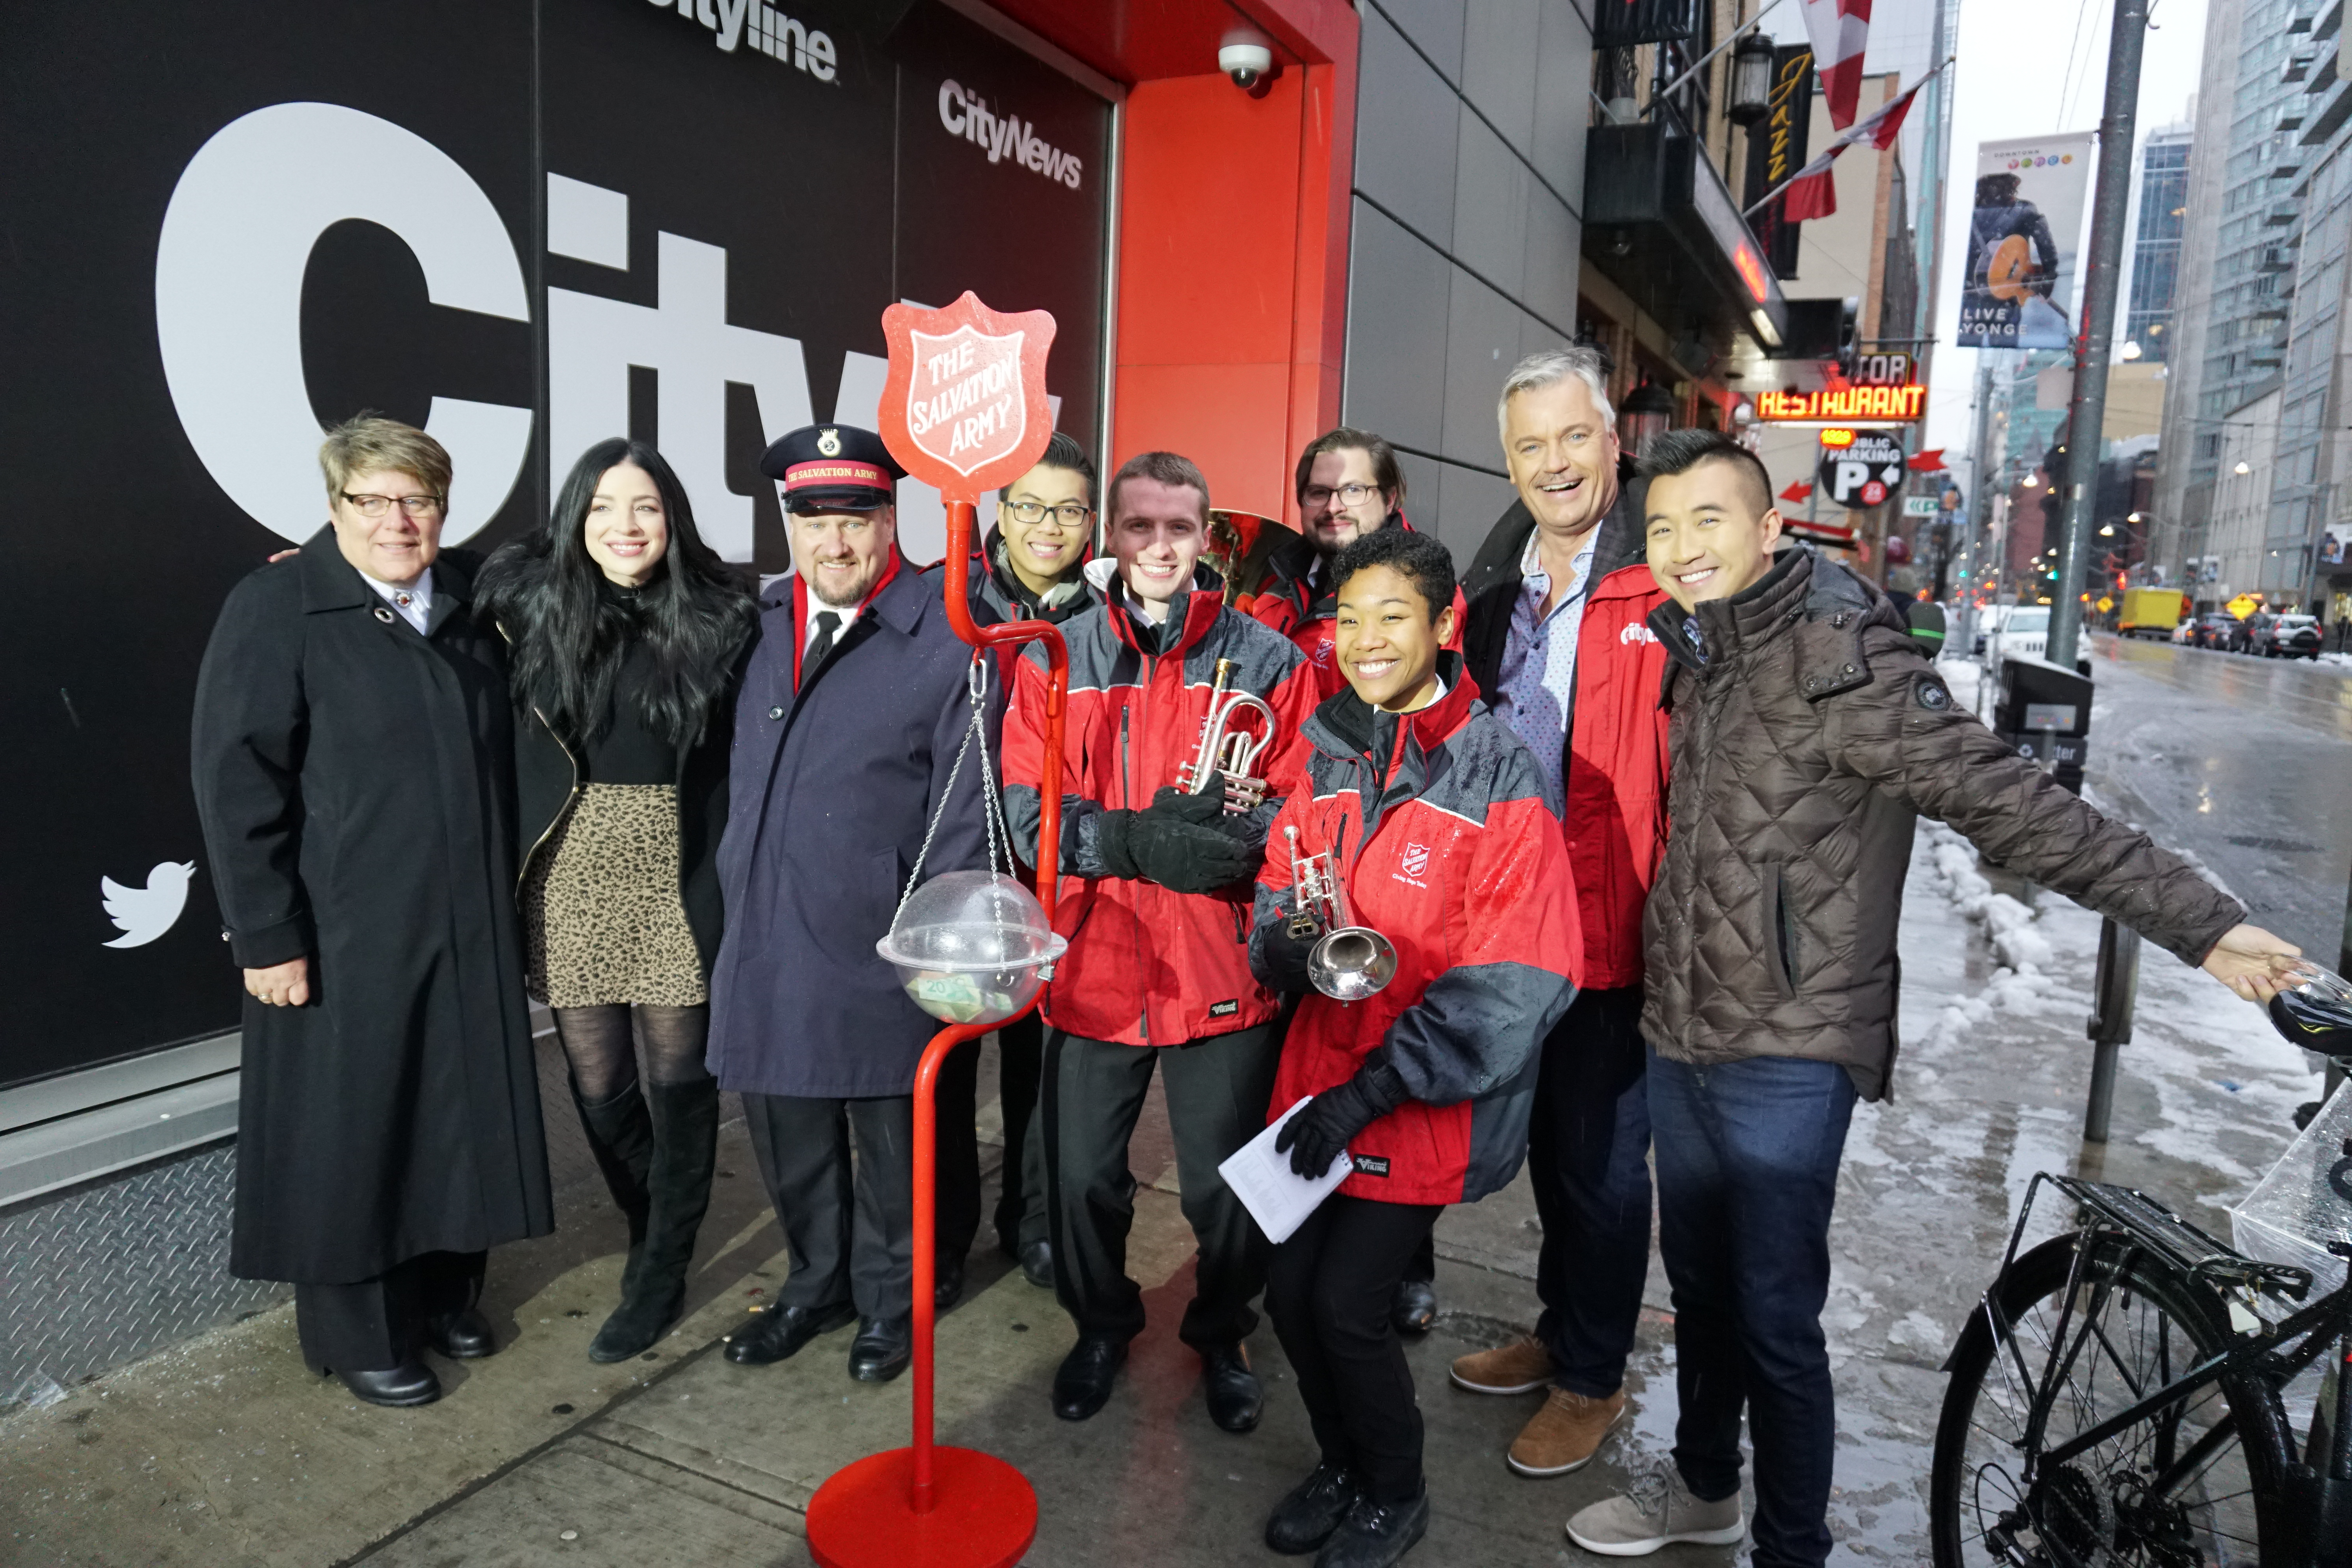 Salvation Army Kettle Launch with Breakfast Television